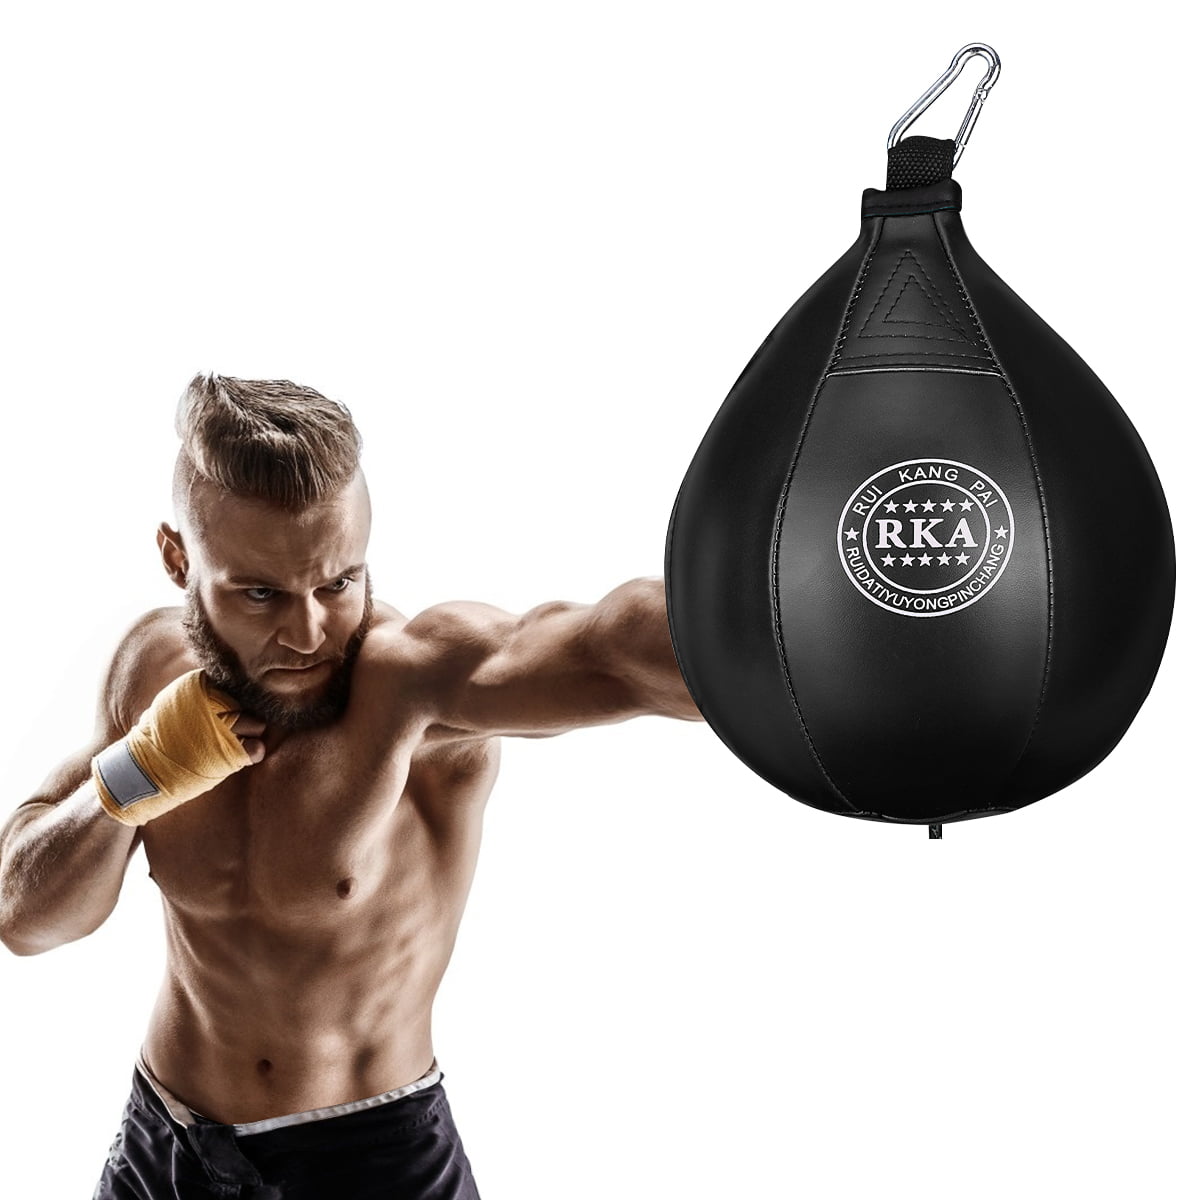 Everlast Leather Speedball Boxing Fitness Training Gym Workout Martial Arts 